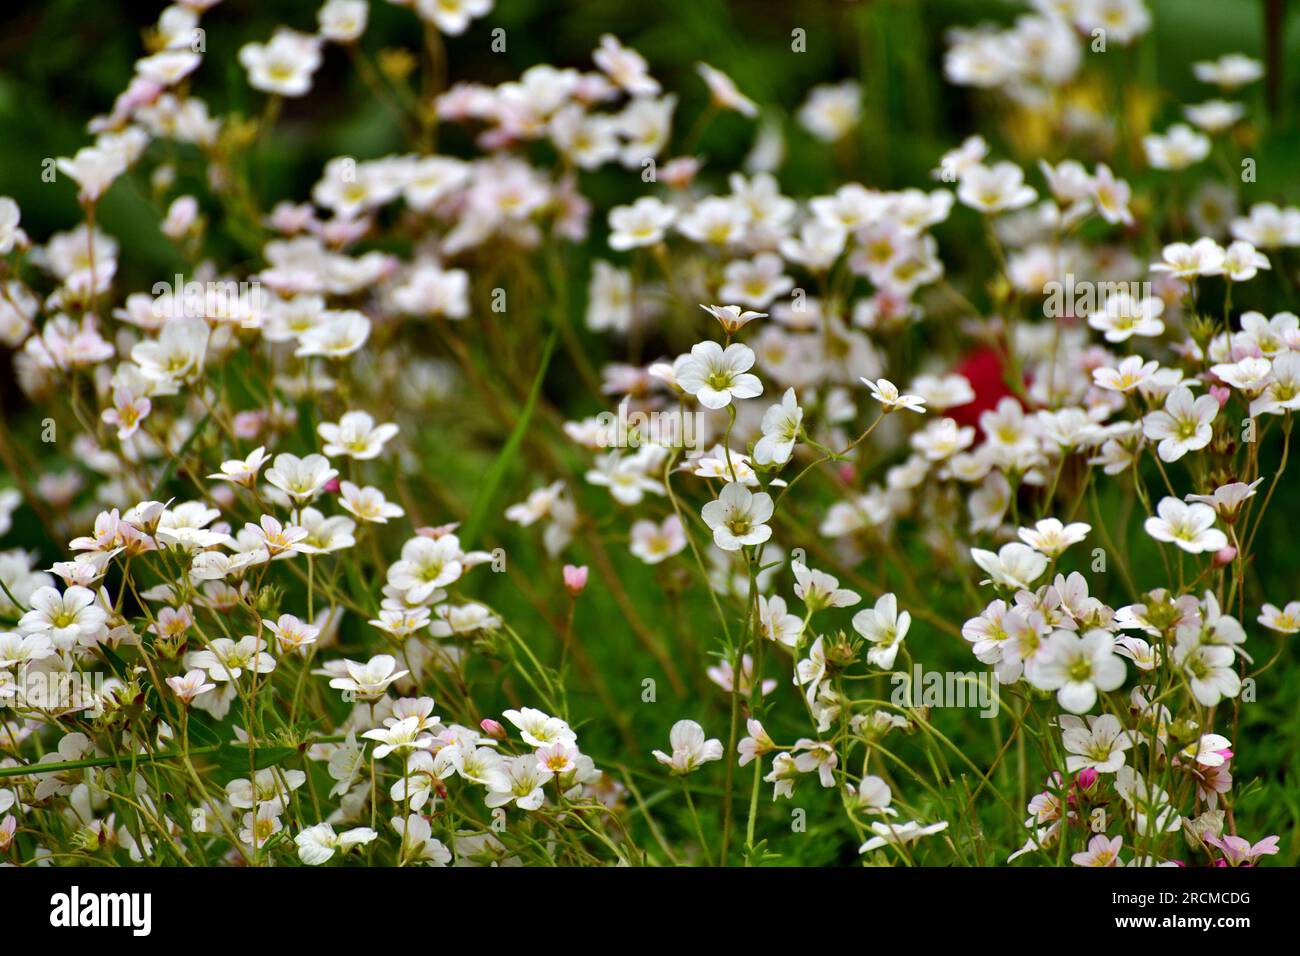 Saxifraga is ornamental herbaceous plant used for landscaping gardens. Stock Photo